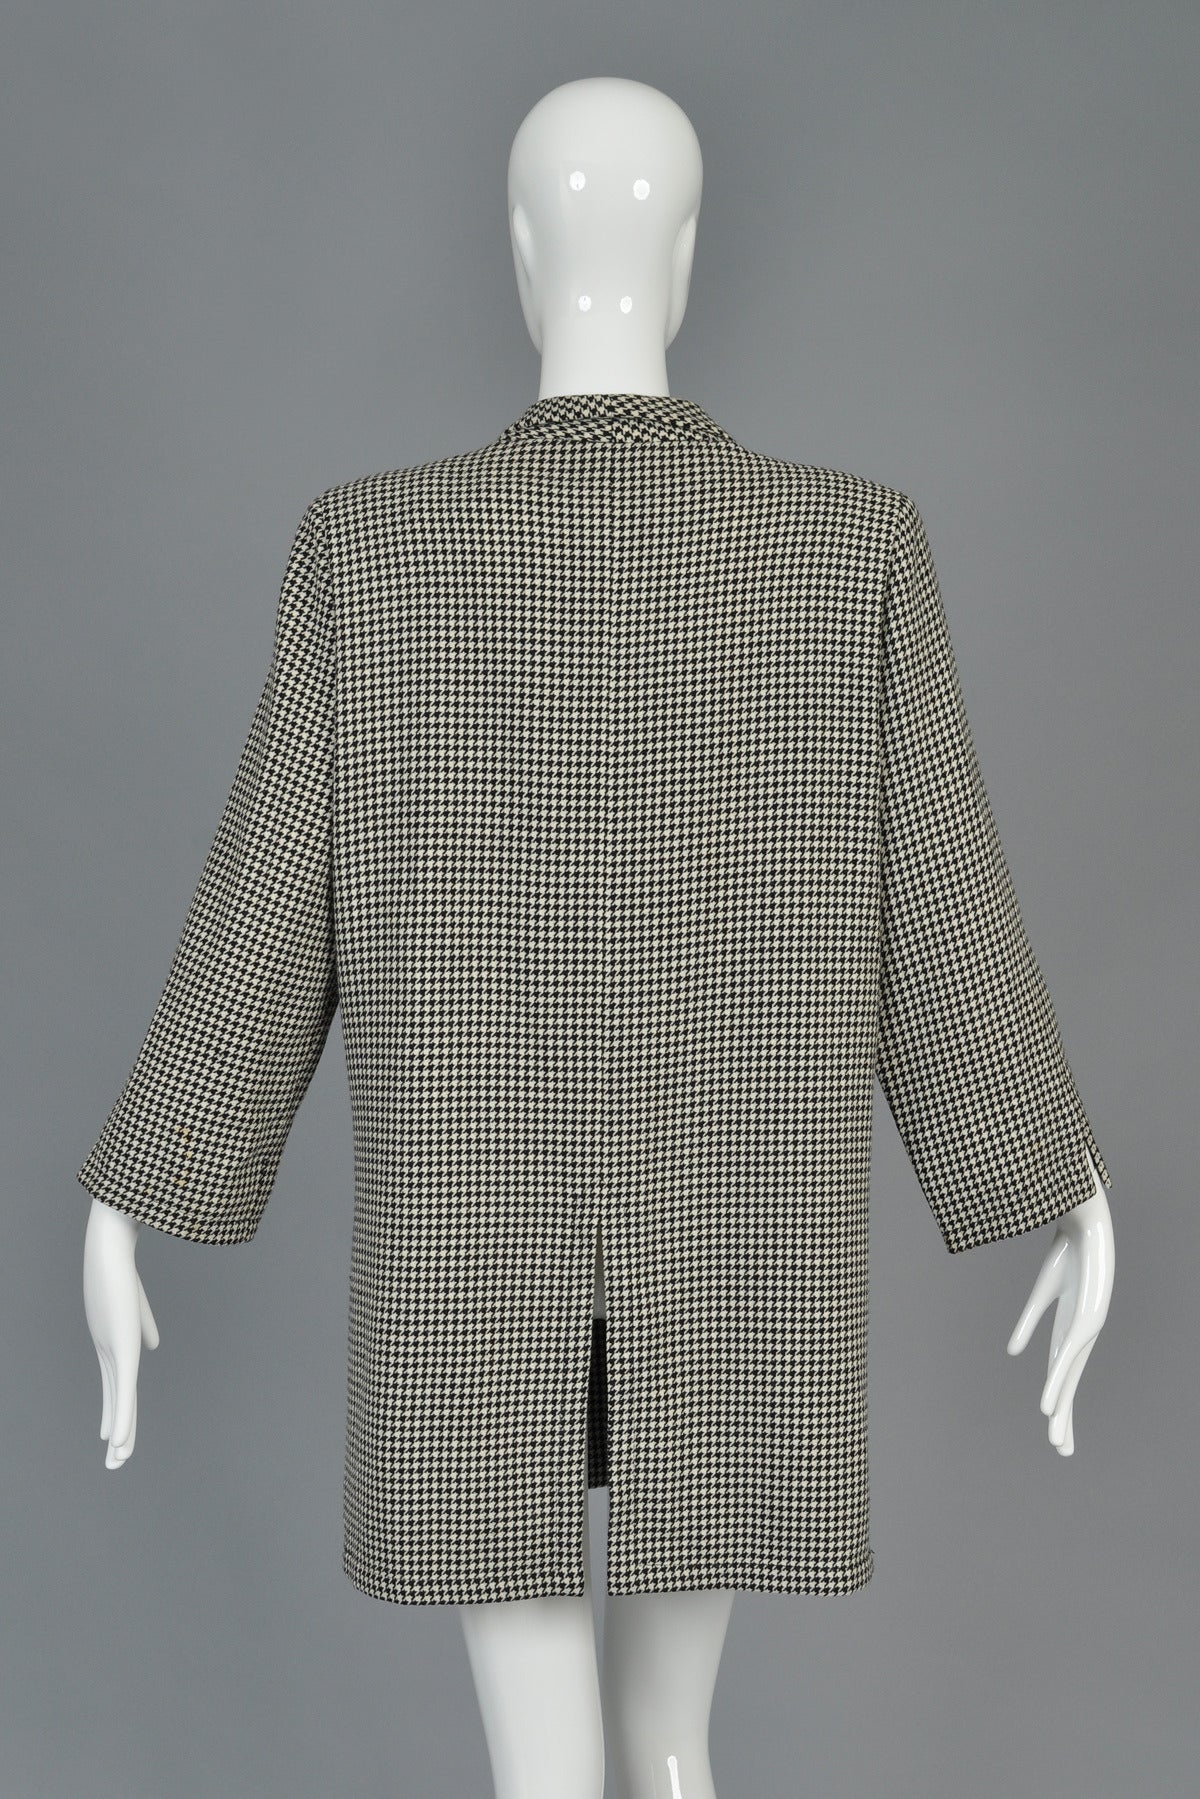 F/W 93 Pierre Cardin Haute Couture Houndstooth Vinyl Tie Jacket For Sale 4